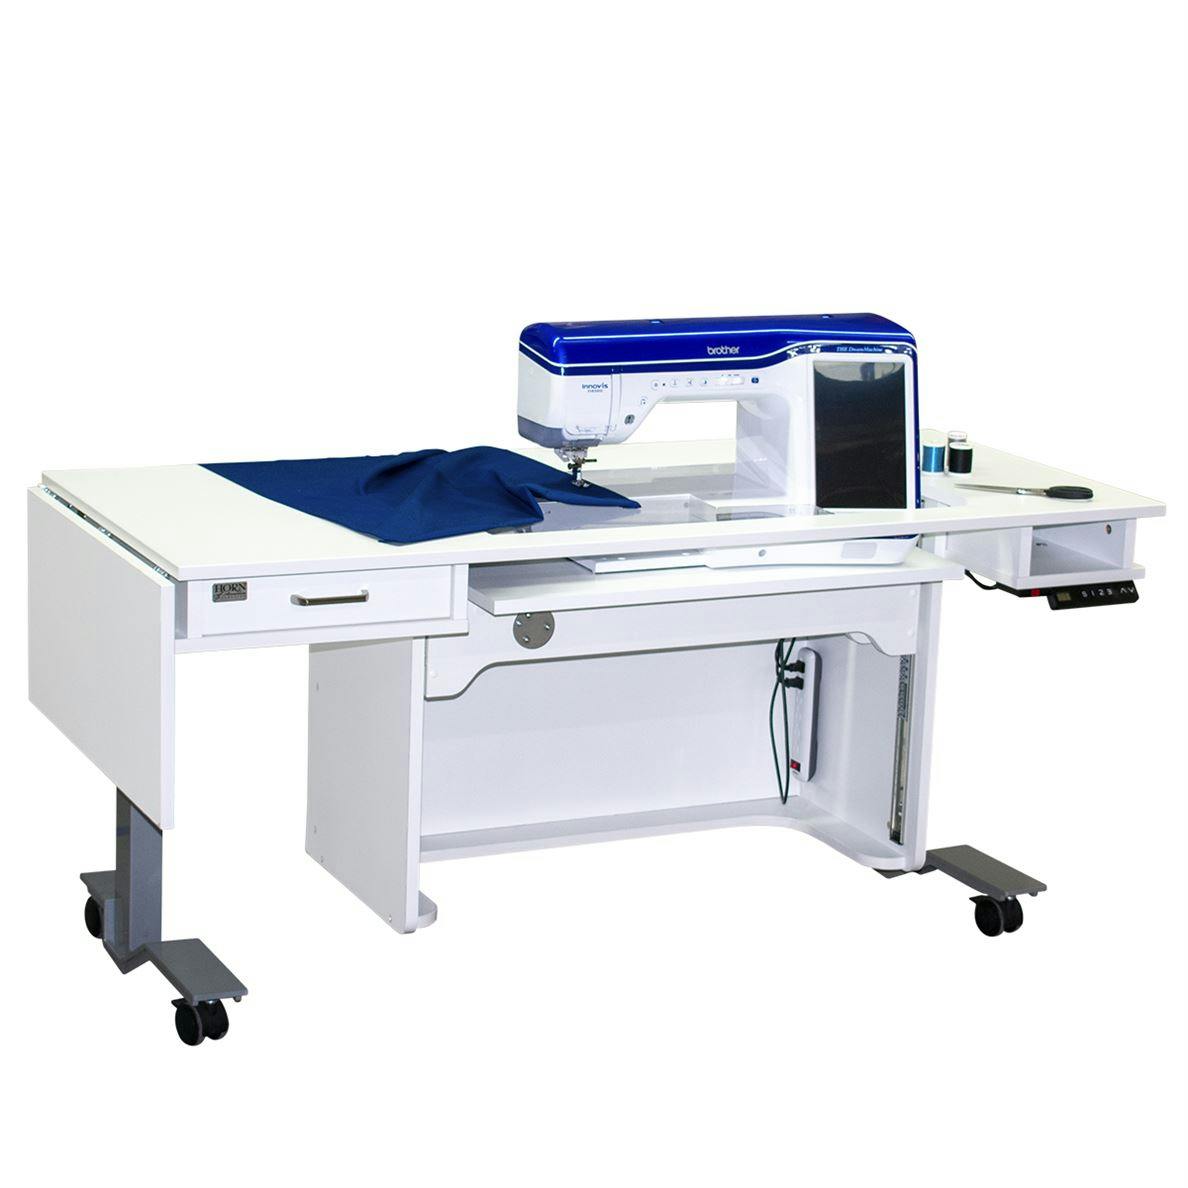 Janome Universal Sewing Table - Furniture Sale